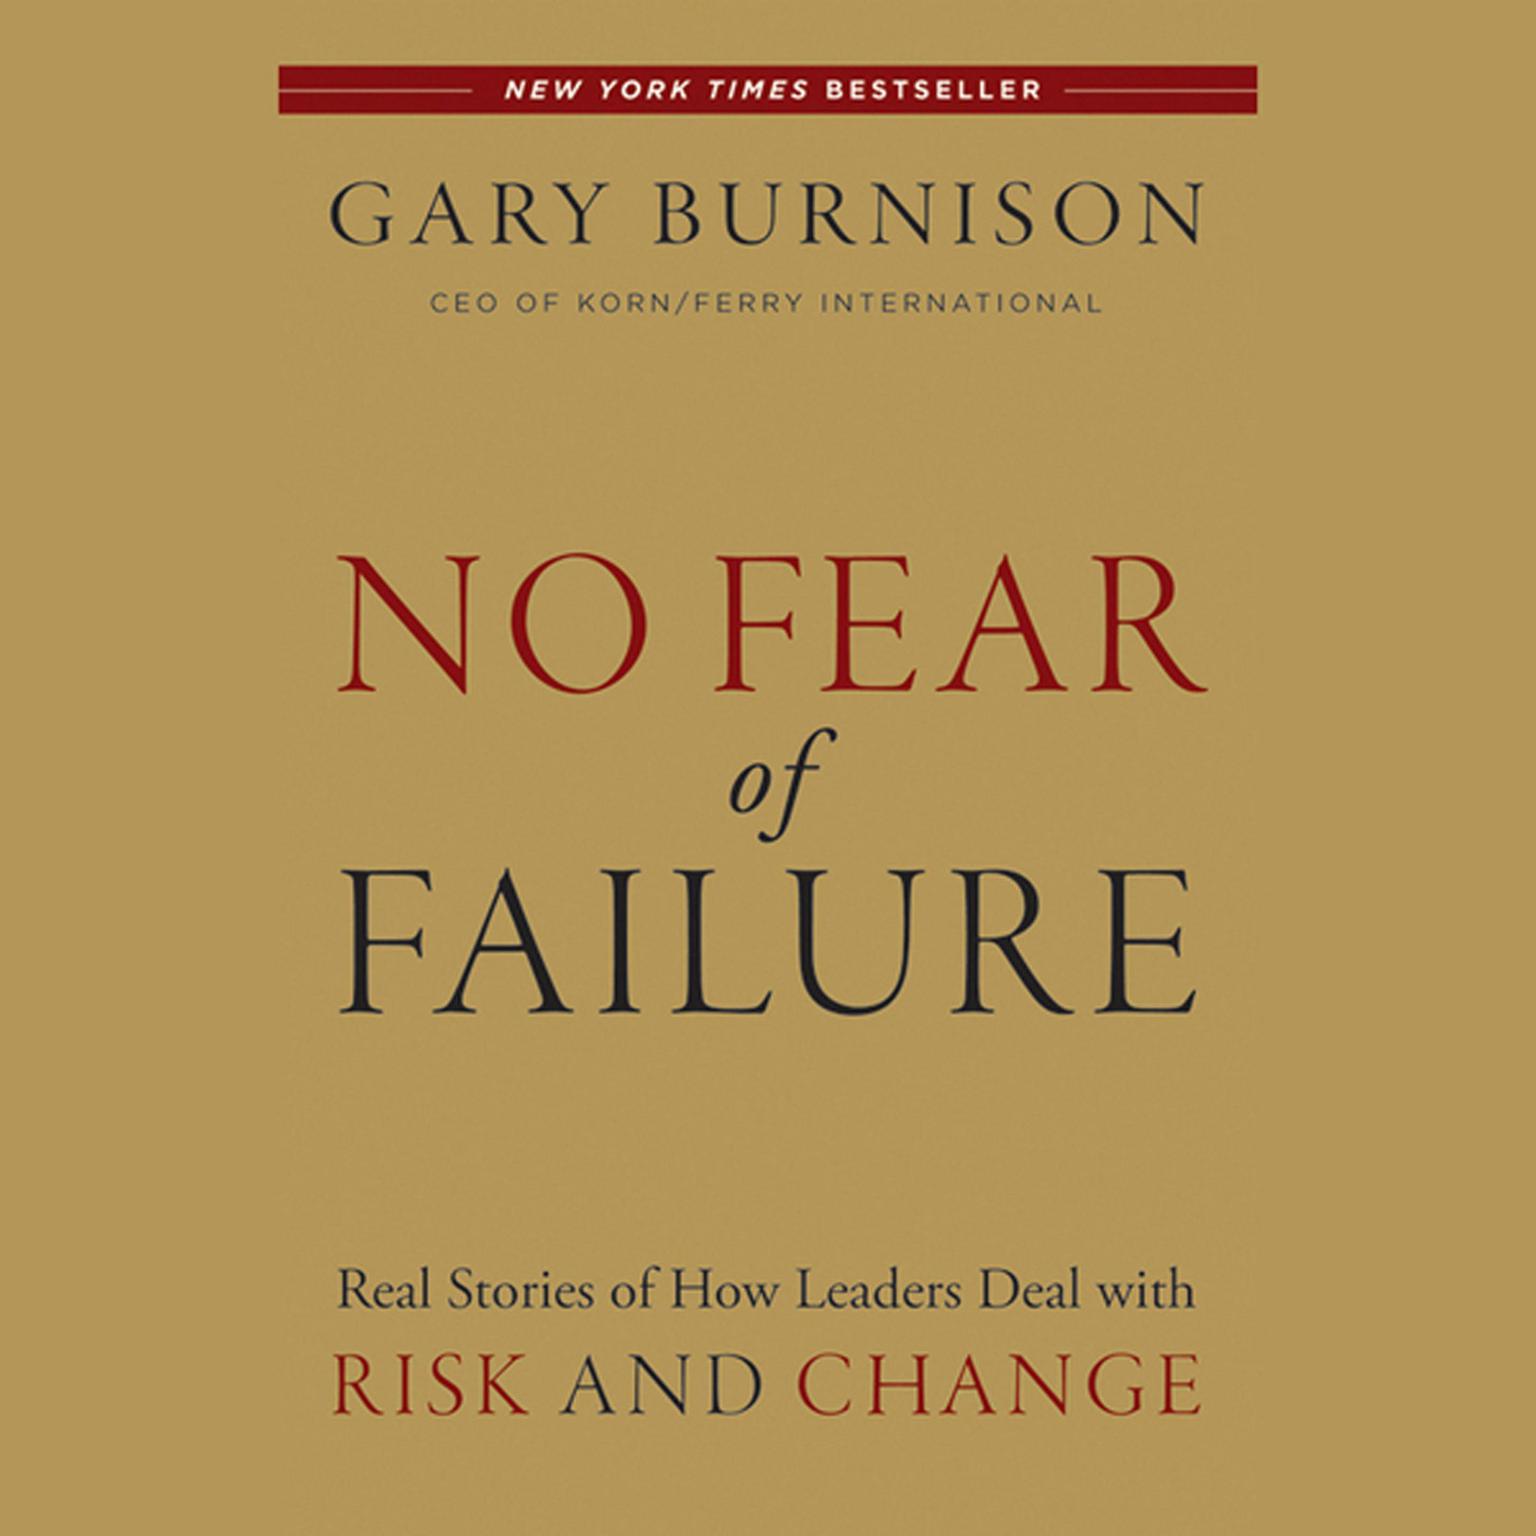 No Fear of Failure: Real Stories of How Leaders Deal with Risk and Change Audiobook, by Gary Burnison